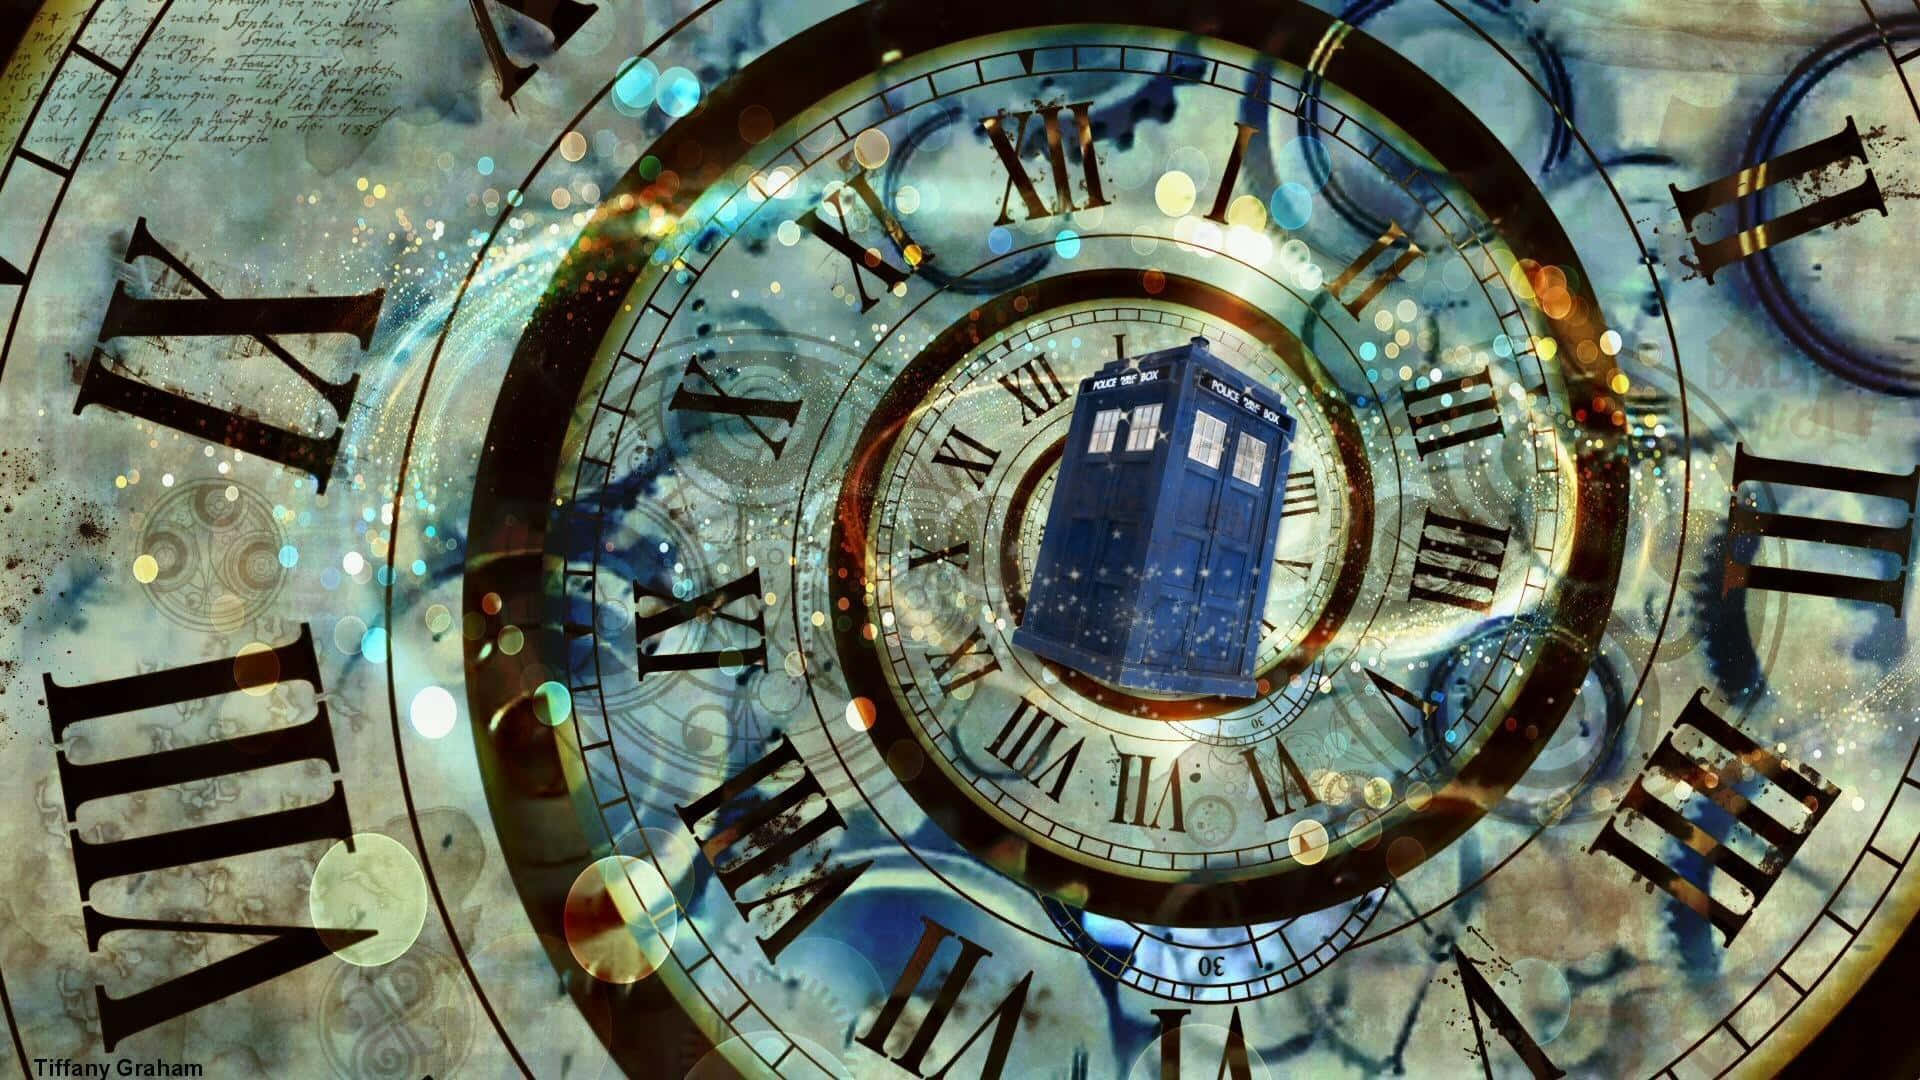 "The TARDIS, Doctor Who’s iconic time-traveling spaceship." Wallpaper